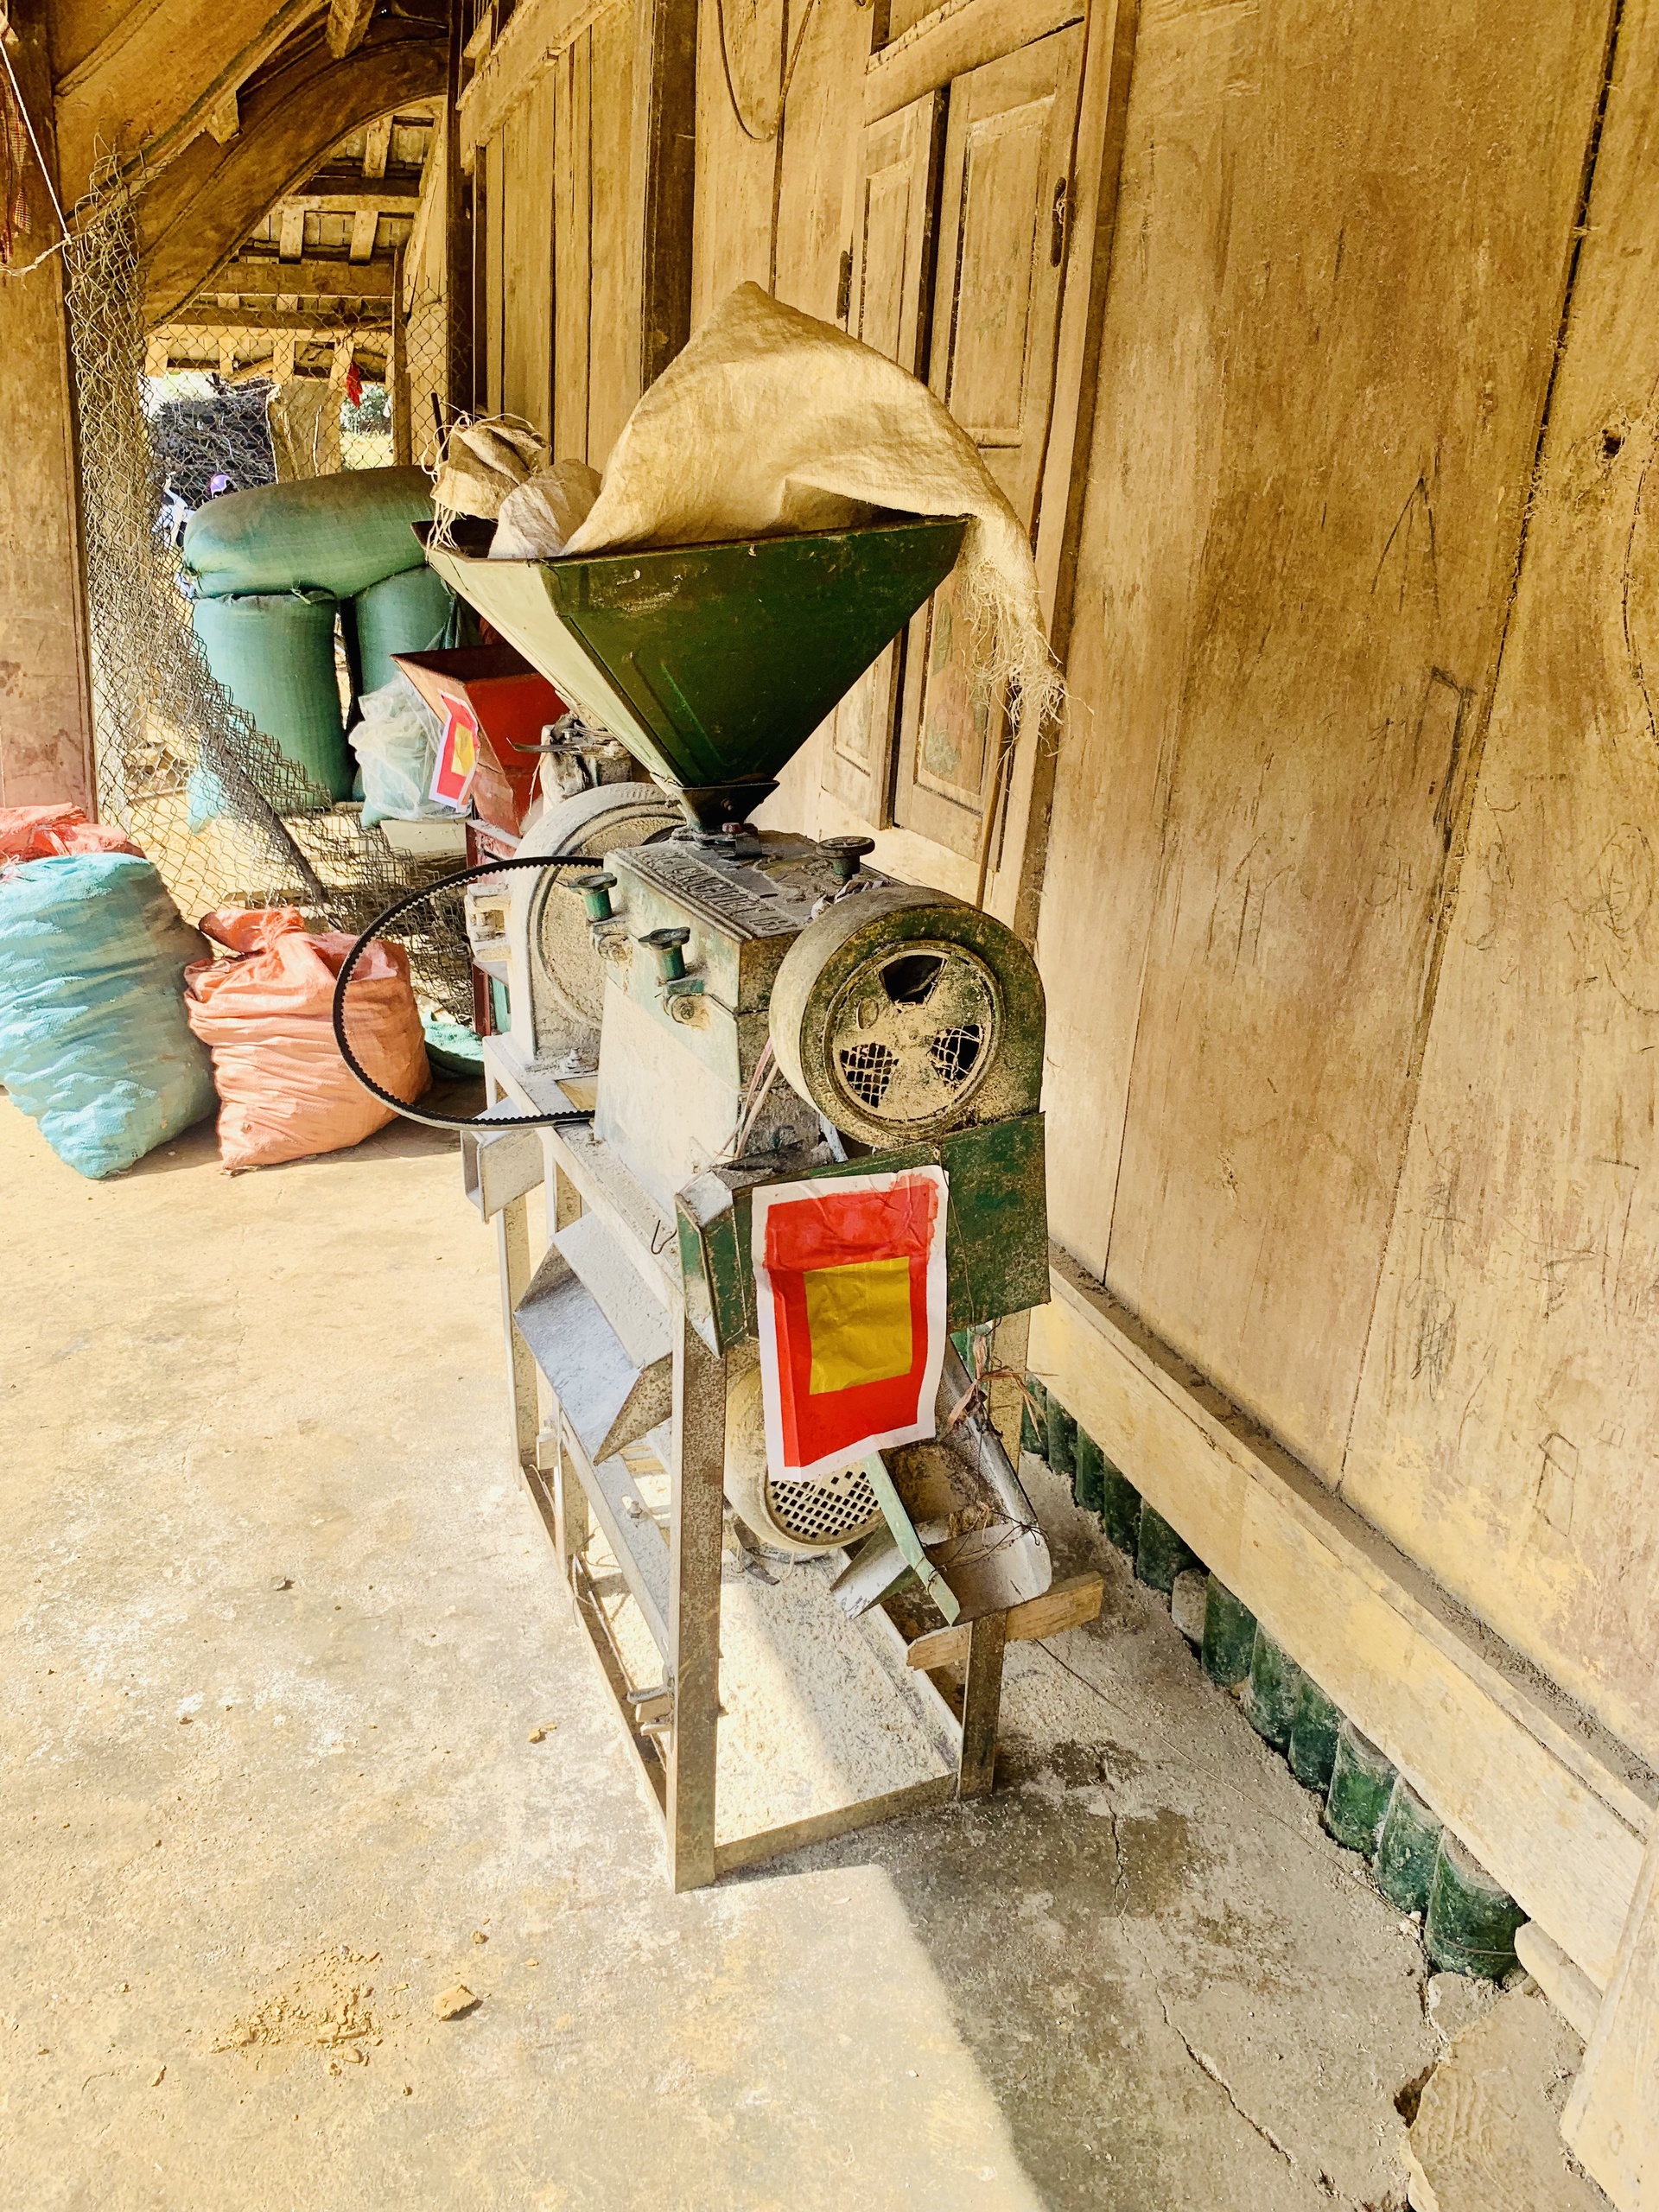 The Mong people stick good luck tokens on animals and objects around the house, including this rice processing machine, to thank them for a year of hard work. Photo: Duc Anh / Tuoi Tre